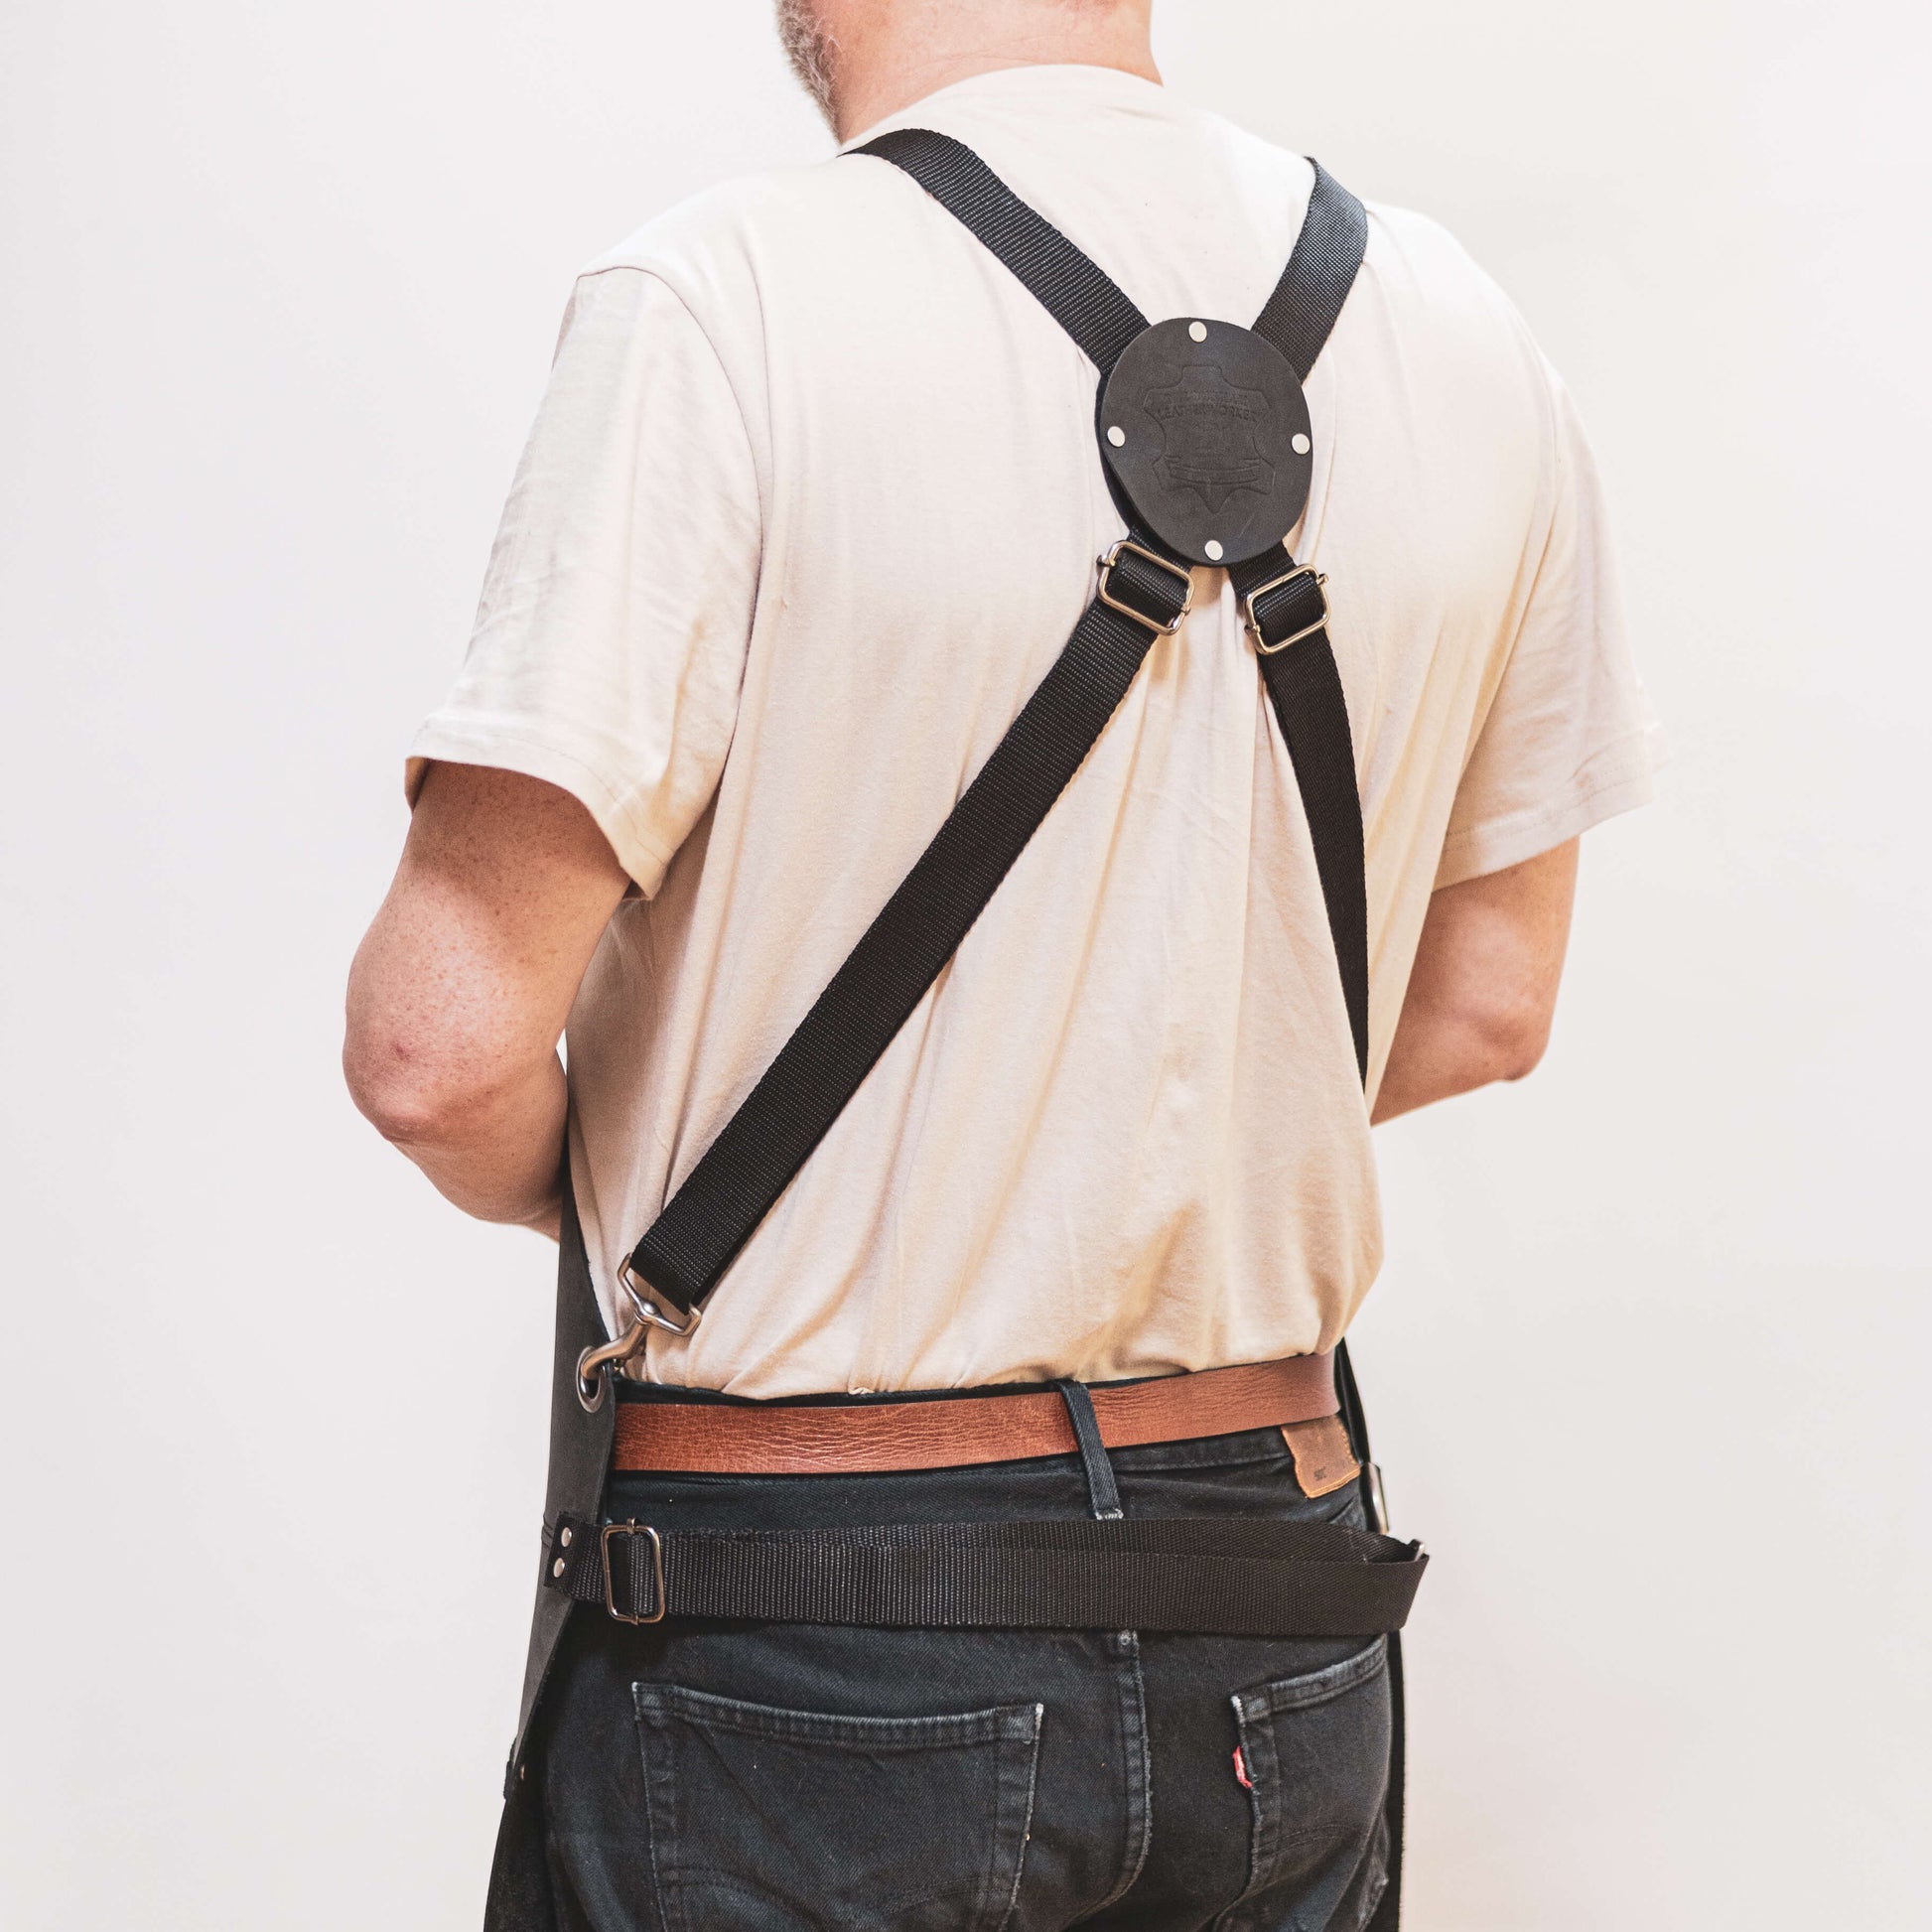 A man viewed from behind wearing a cream shirt and denim jeans, with a black crossbody bag designed by The Durham Leatherworker for tradesmen and a brown leather belt. The focus is on the way he carries the bag.